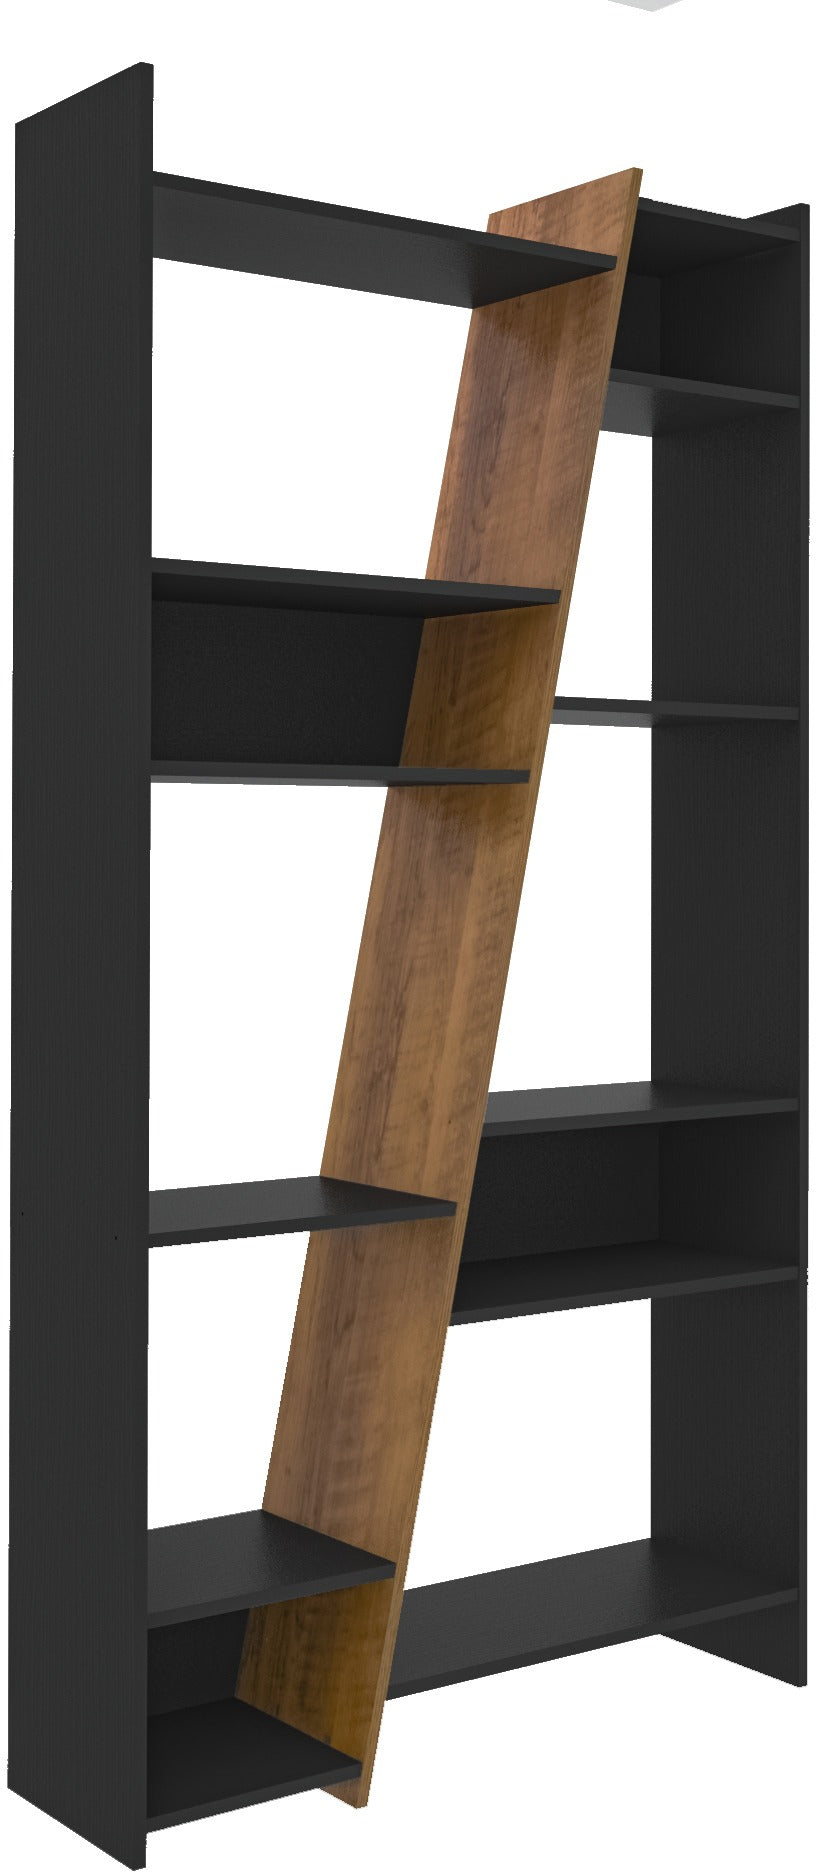 NAPLES-TALL-BOOKCASE-BLACK-AND-PINE-EFFECT-300-306-043-6.jpg